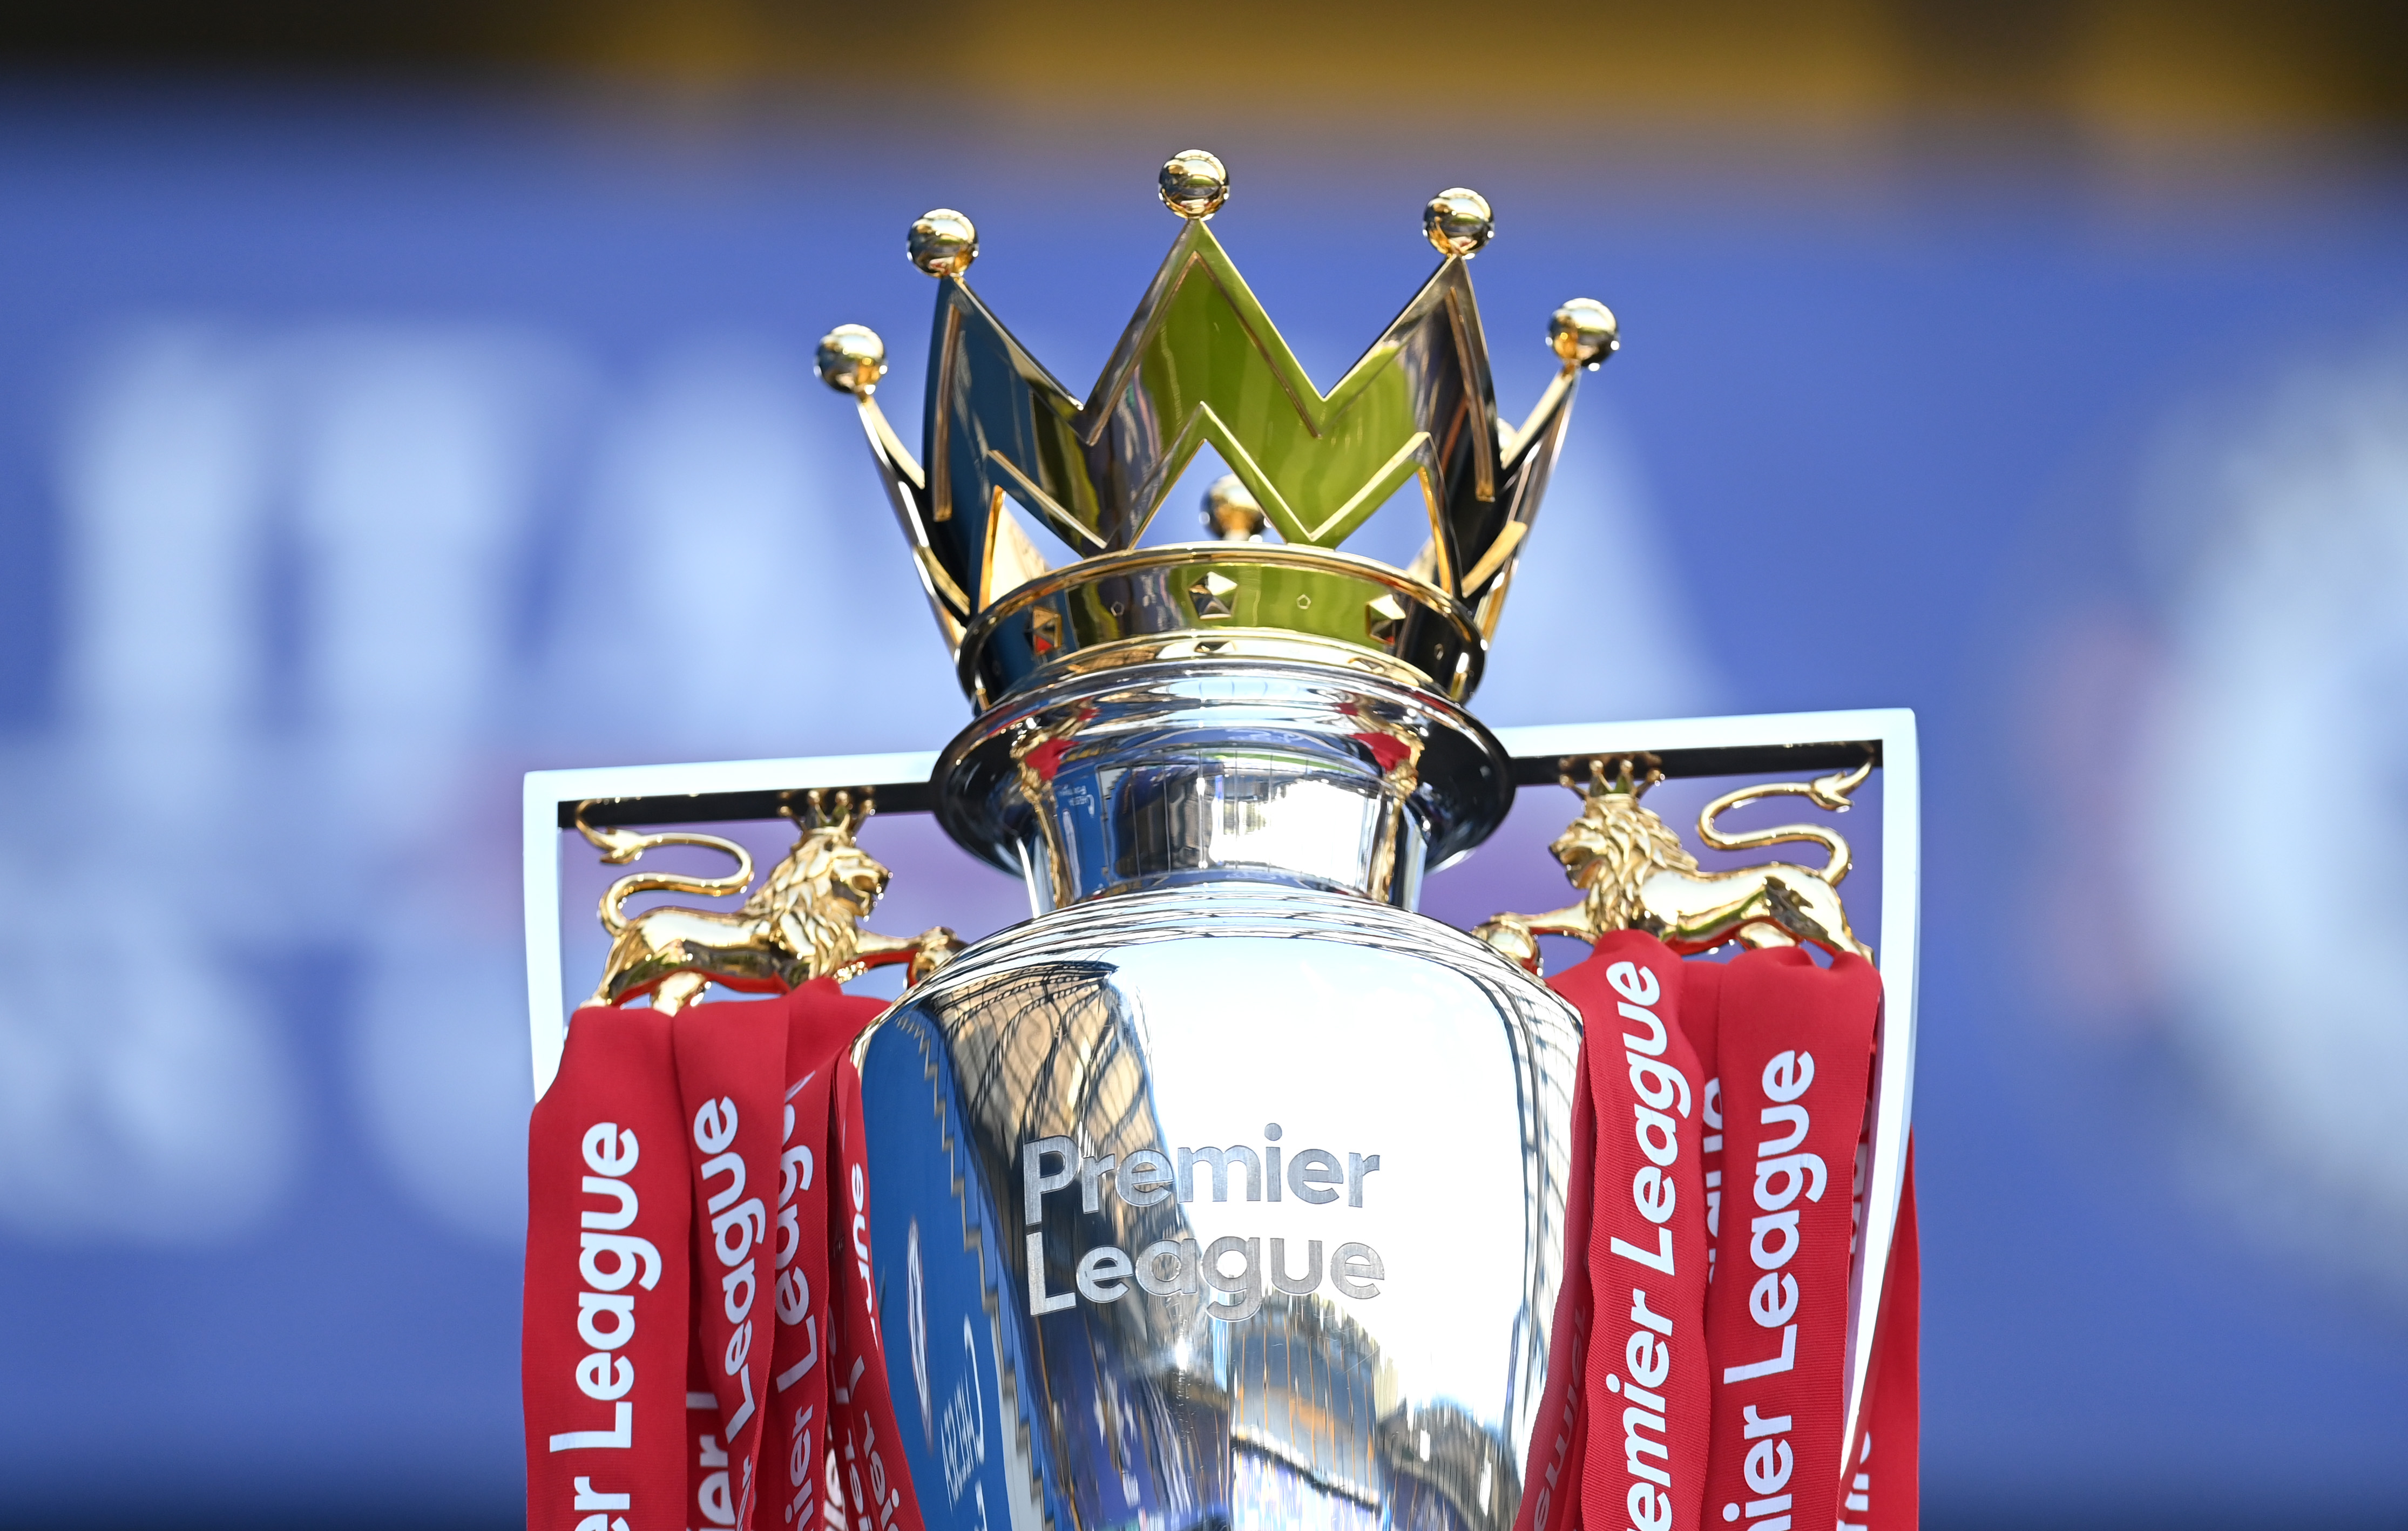 Sky Sports pundits weigh in on this season’s Premier League title race